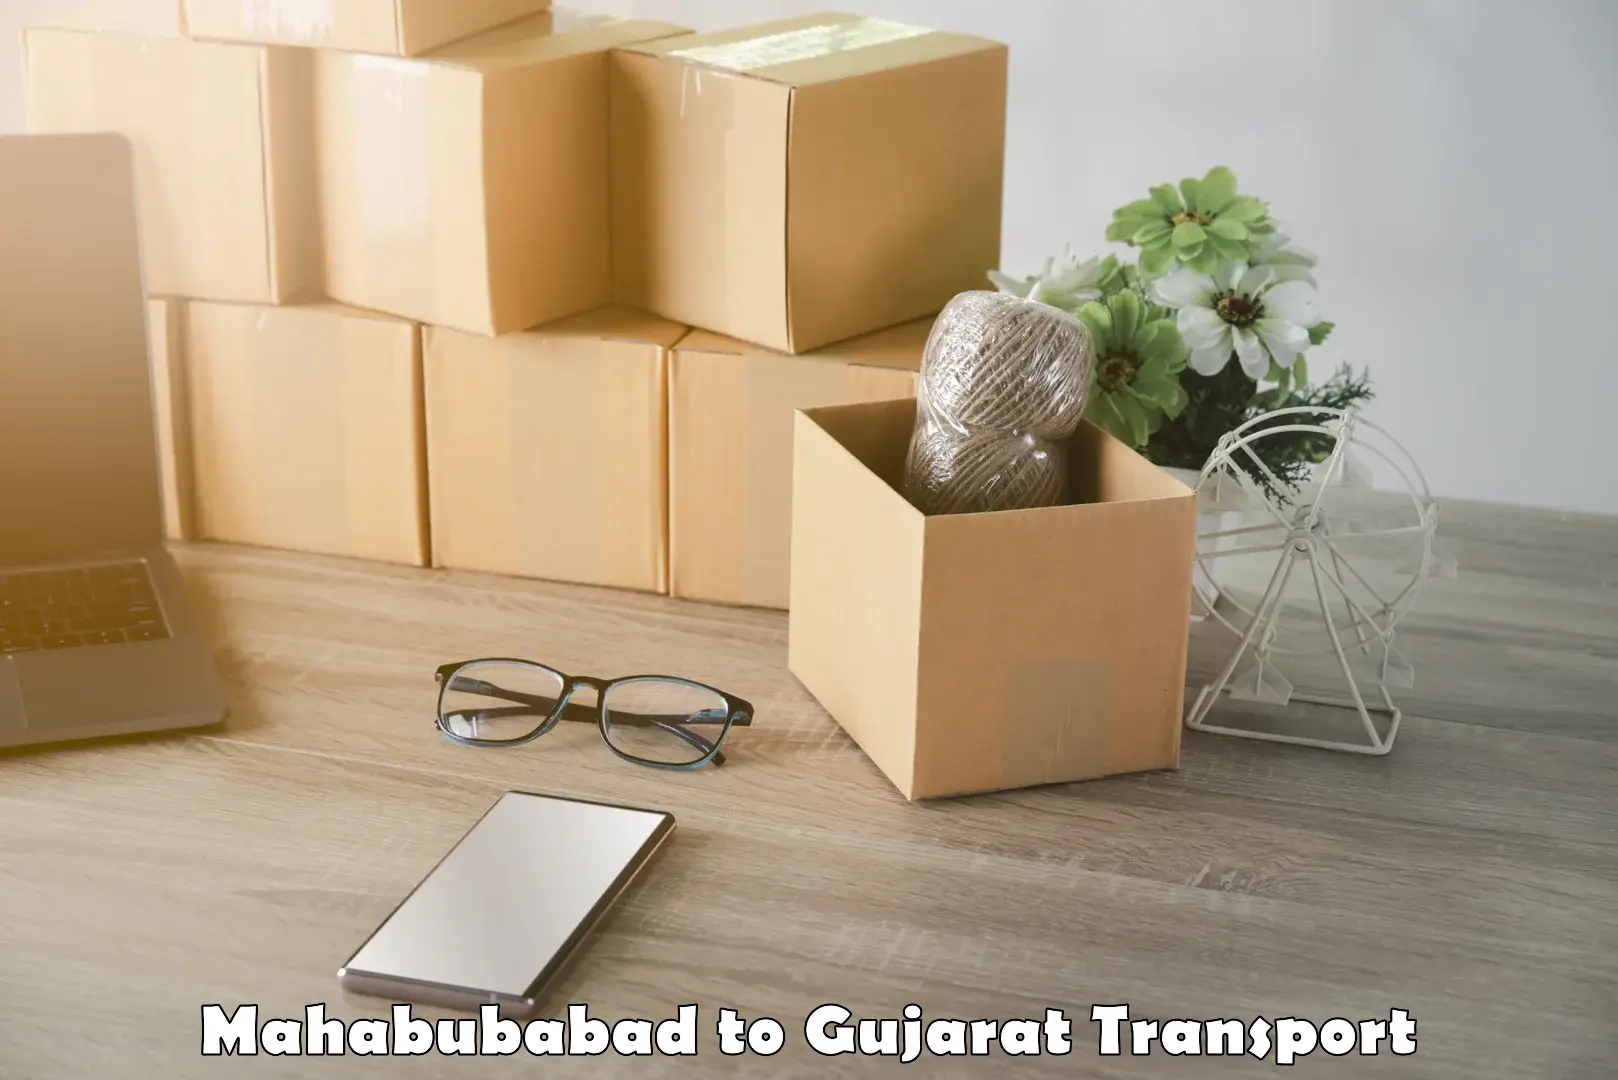 Truck transport companies in India in Mahabubabad to Mundra